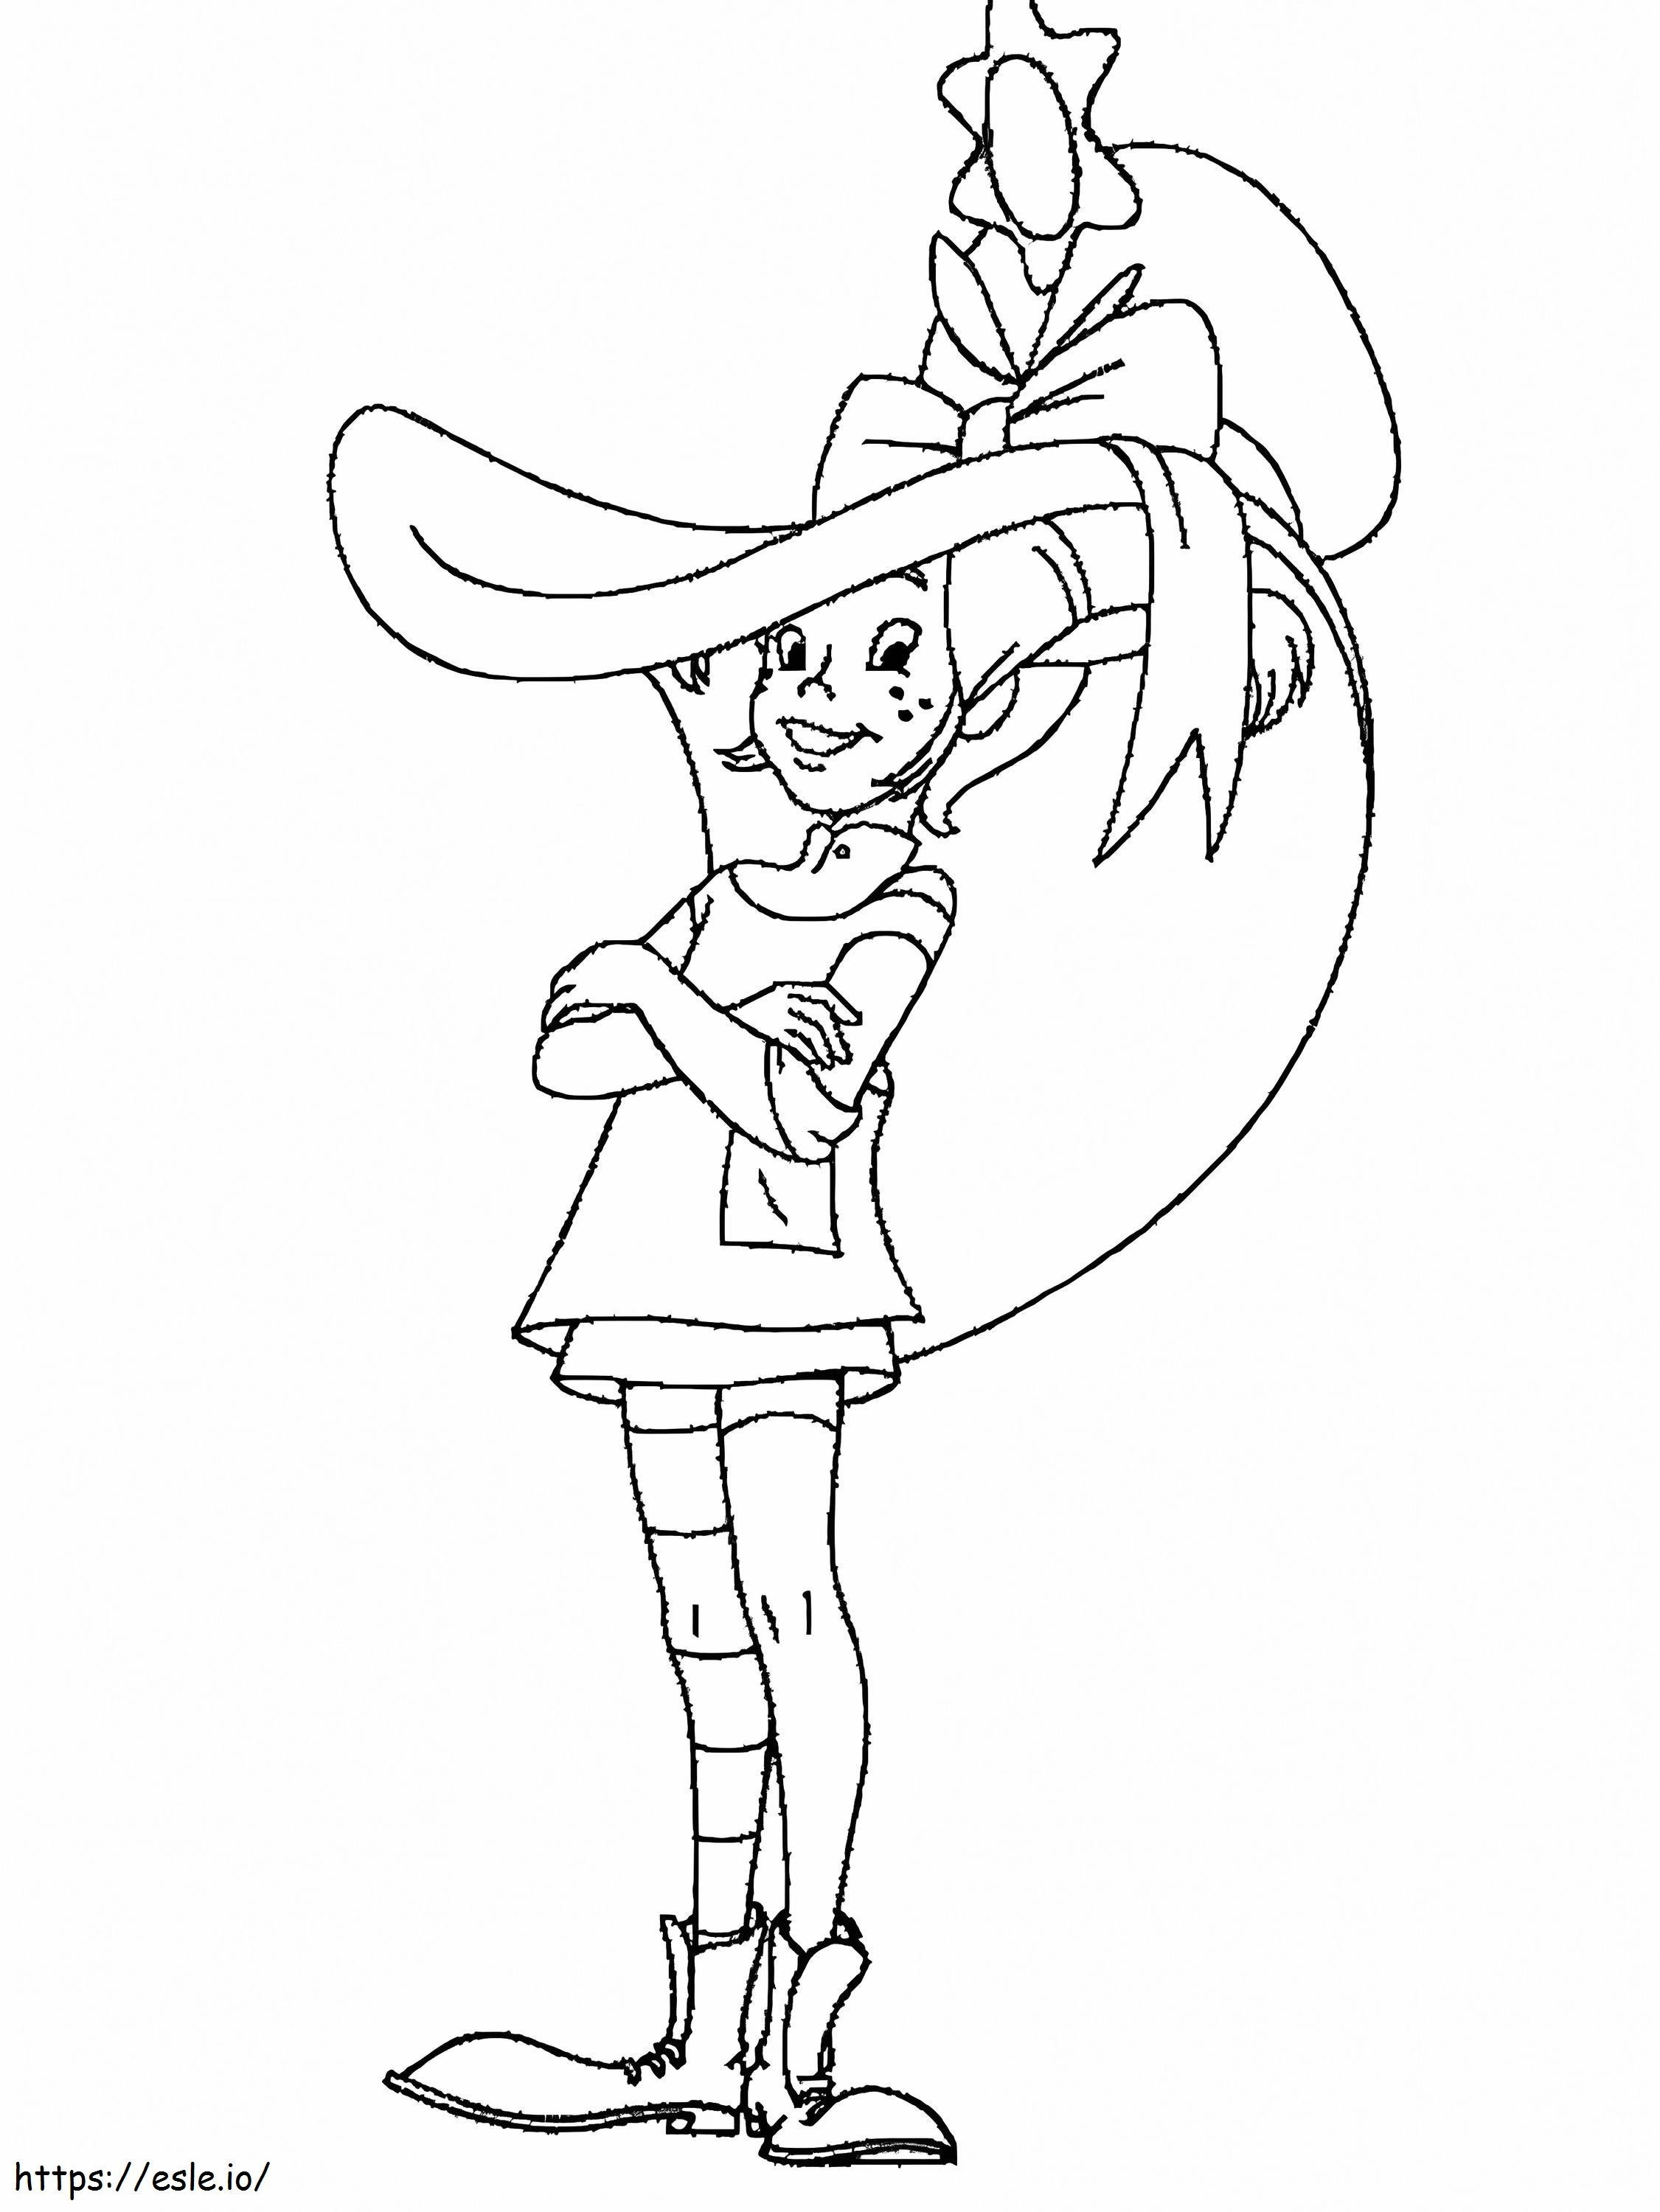 Pippi Longstocking With Hat coloring page